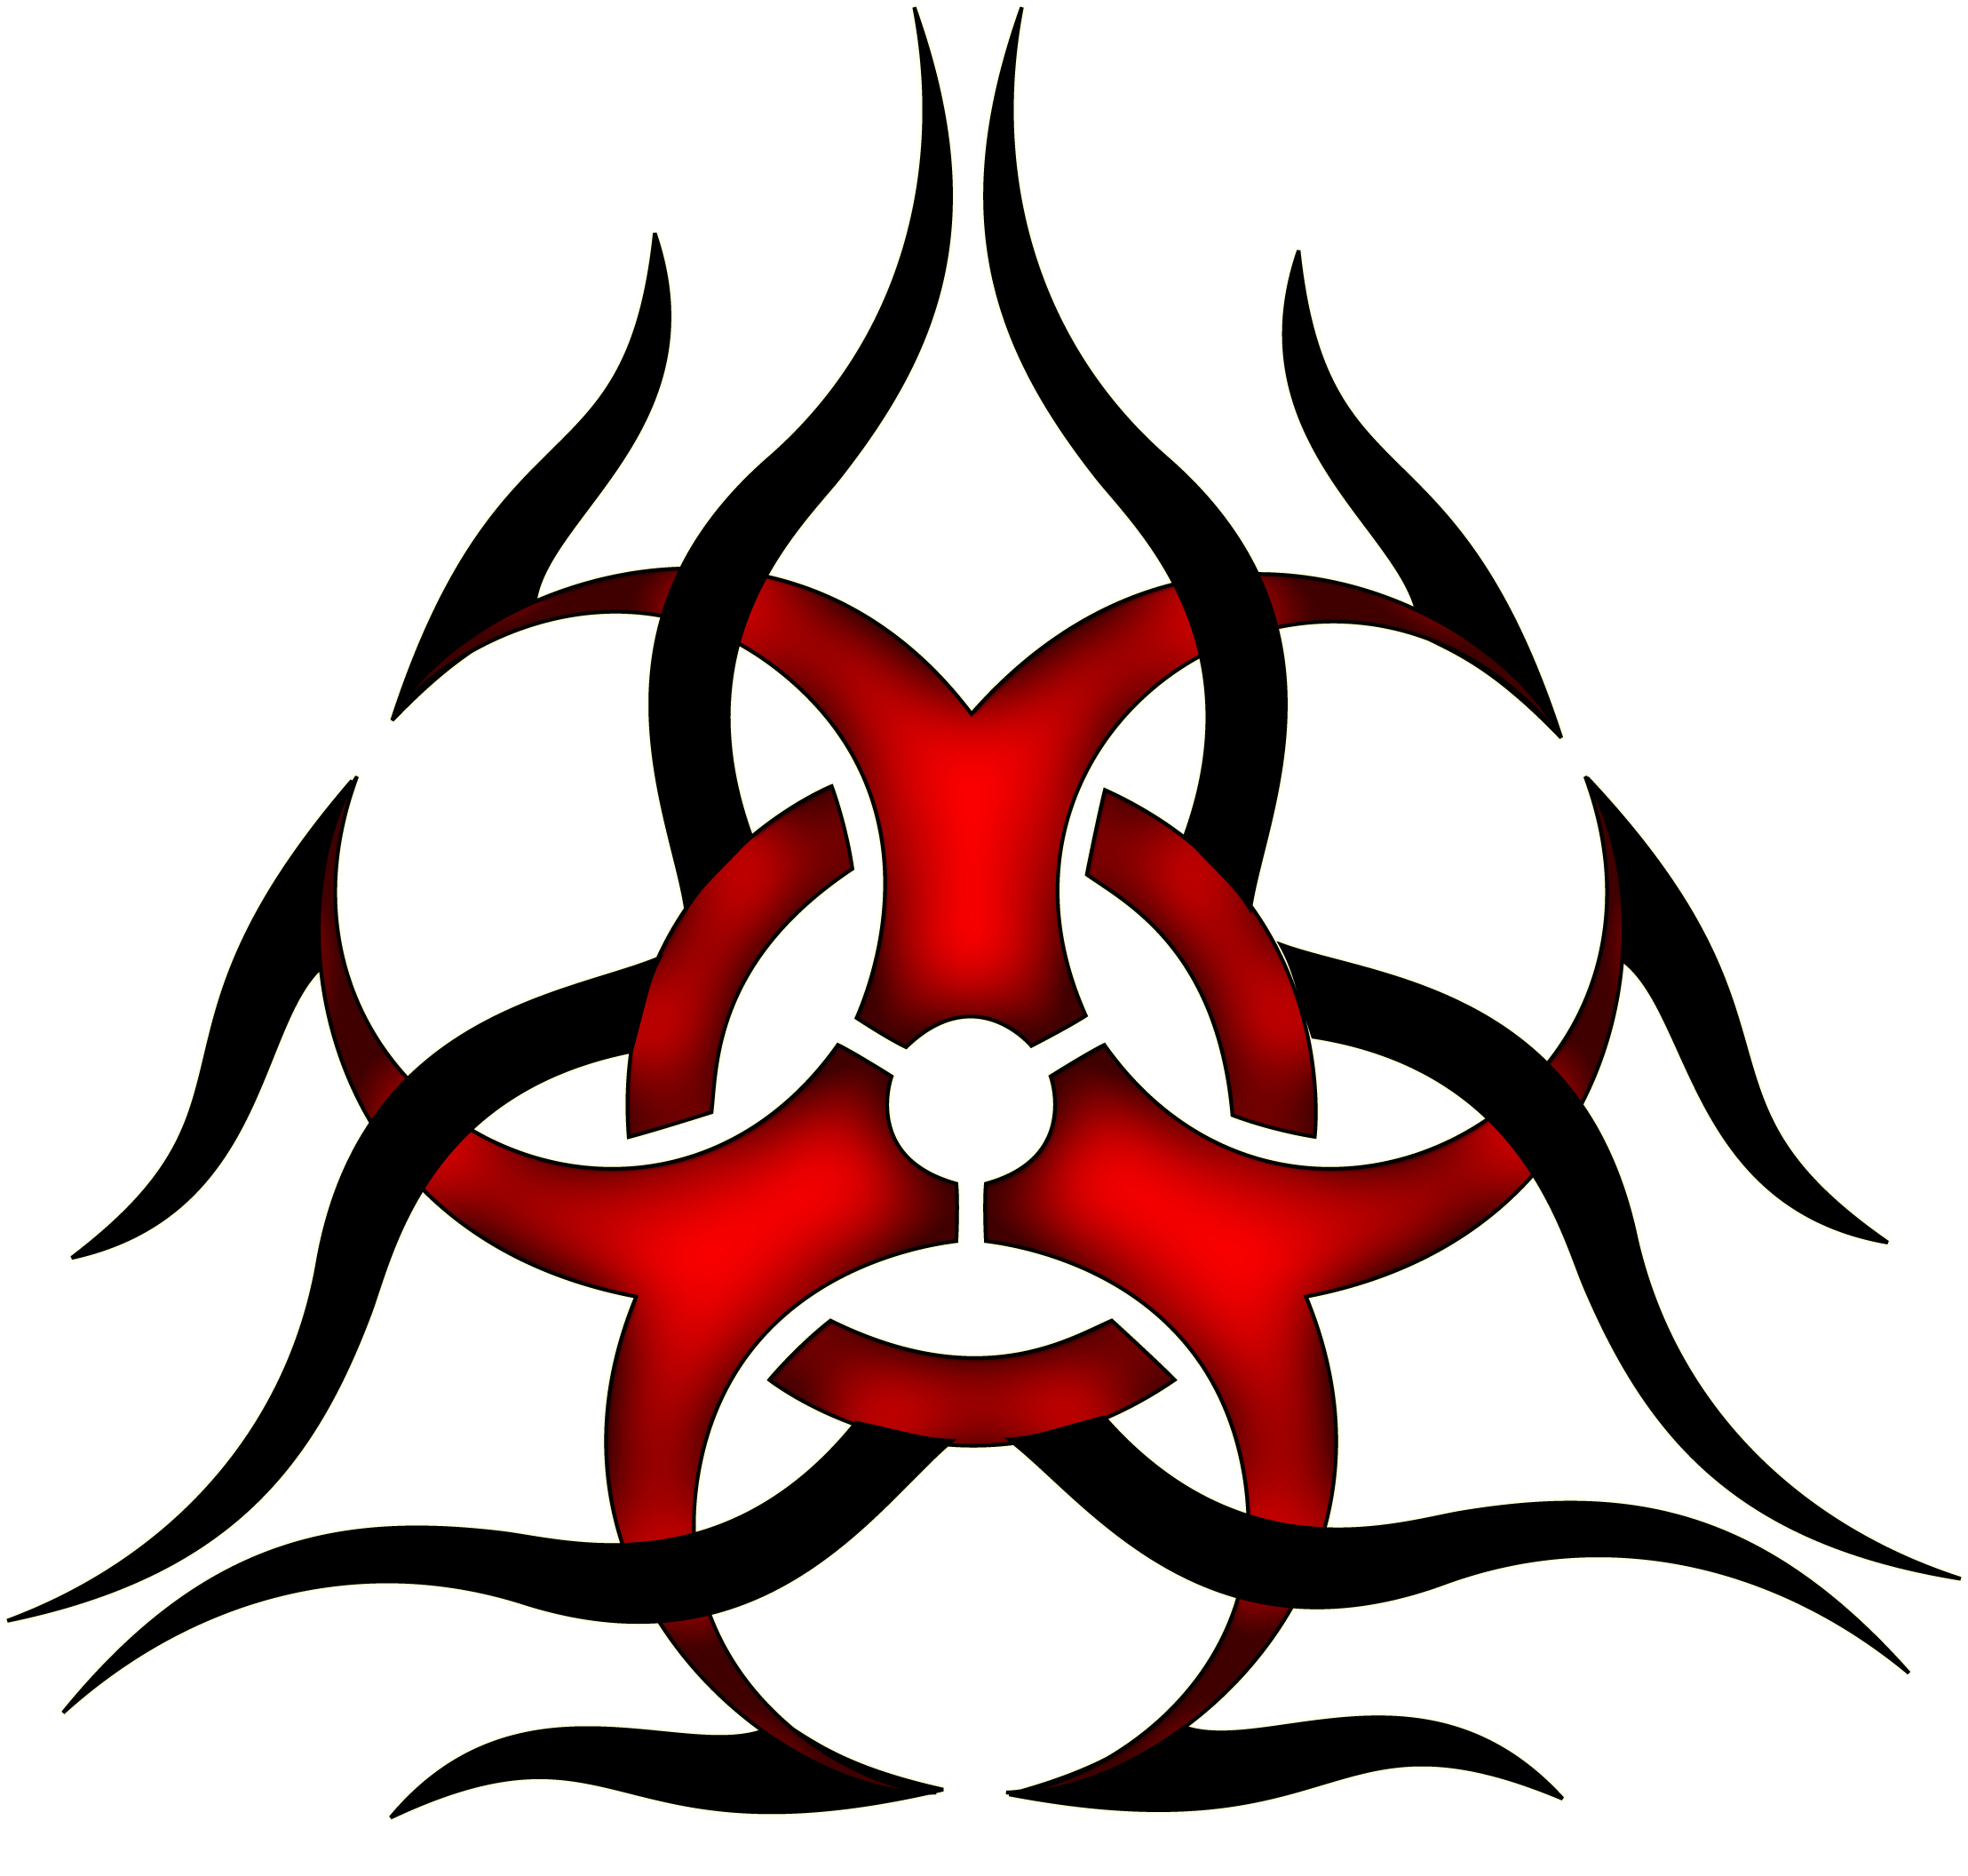 19 Cool Biohazard Symbols Free Cliparts That You Can Download To You